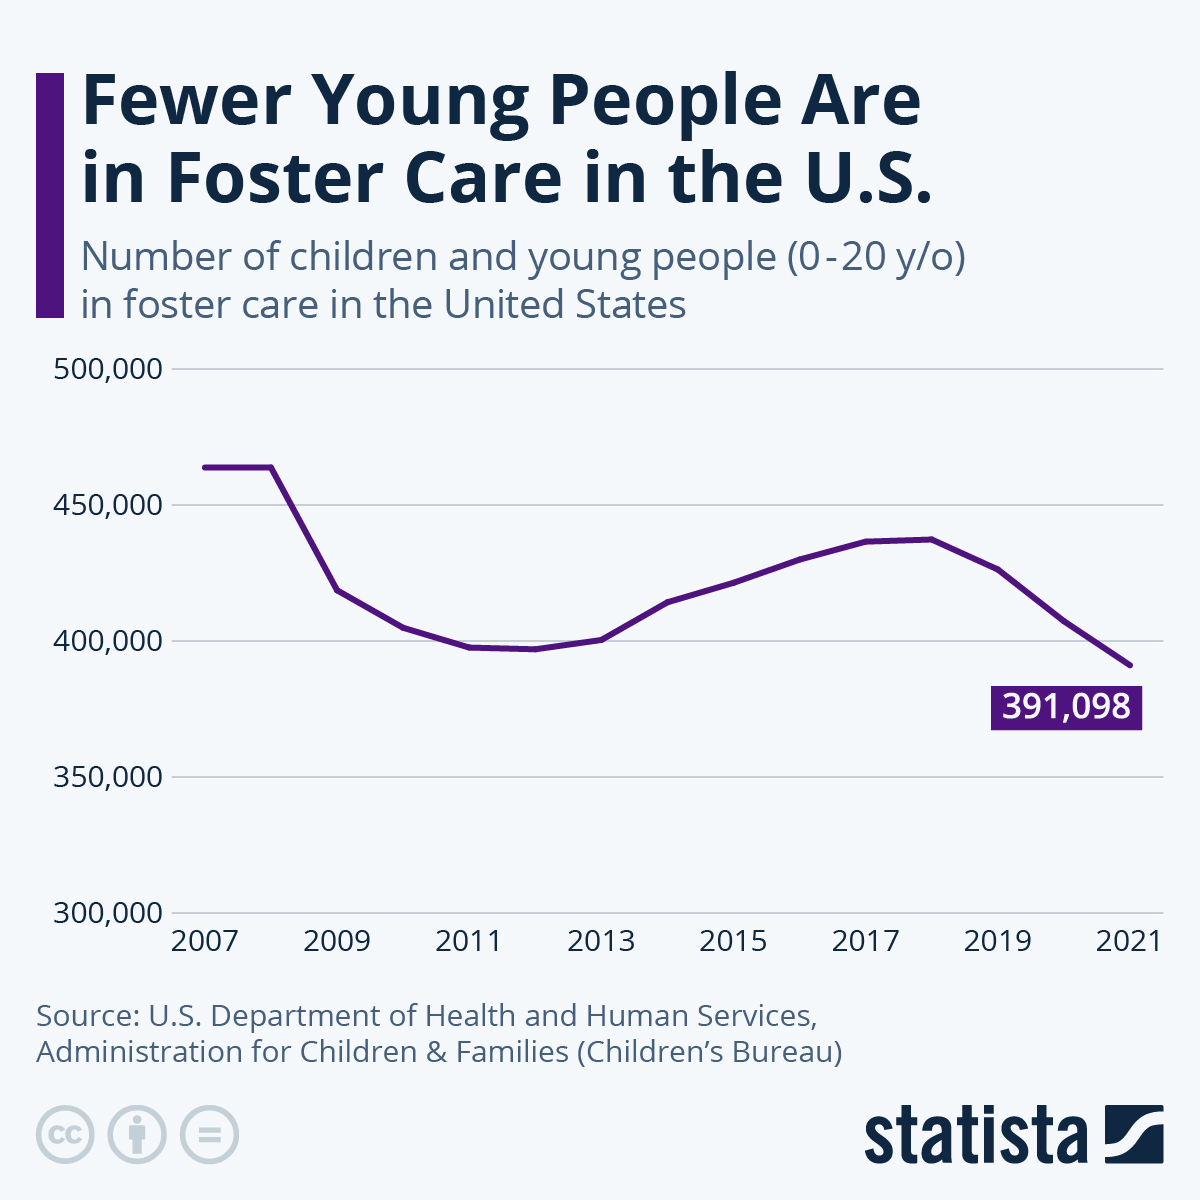 Fewer Young People Are in Foster Care in the U.S.